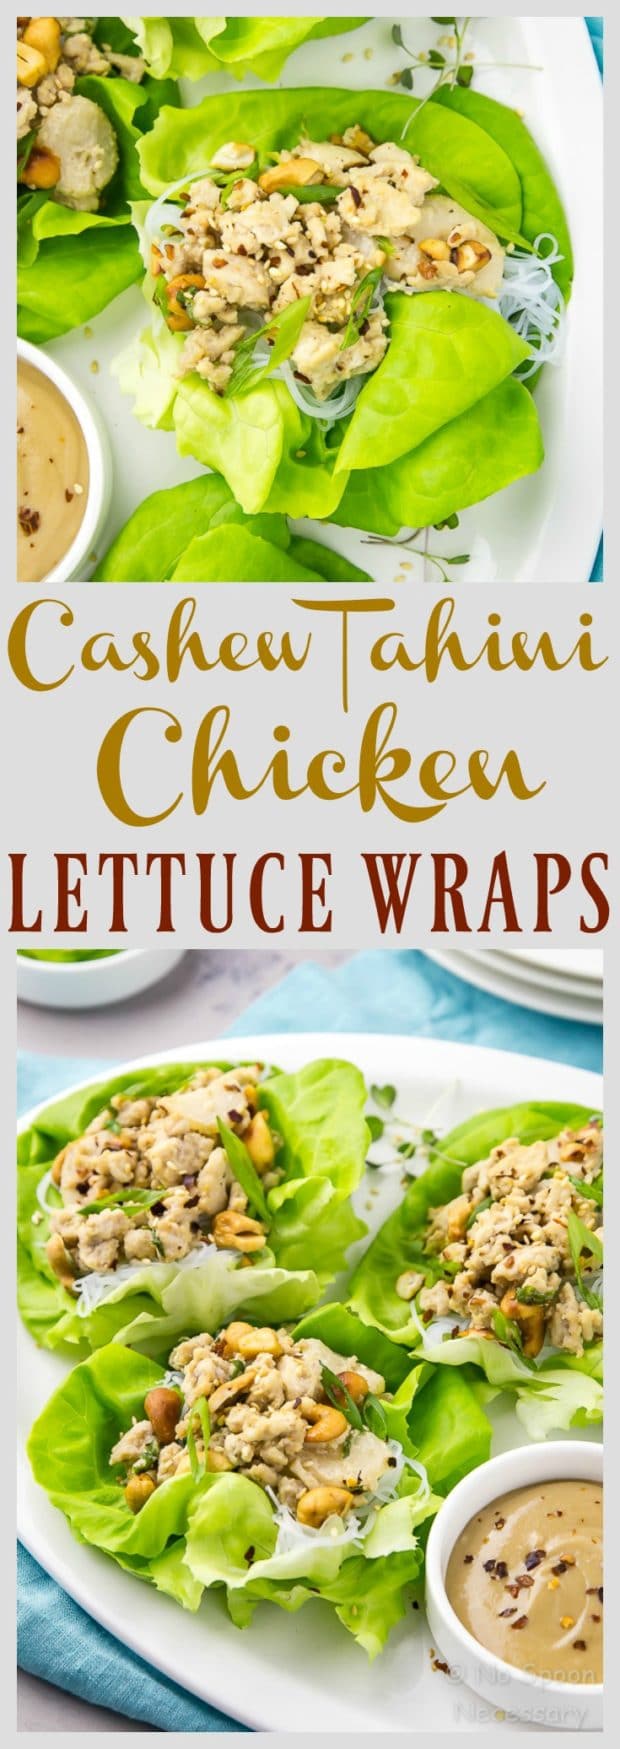 Cashew Chicken Lettuce Wraps with Tahini Sauce